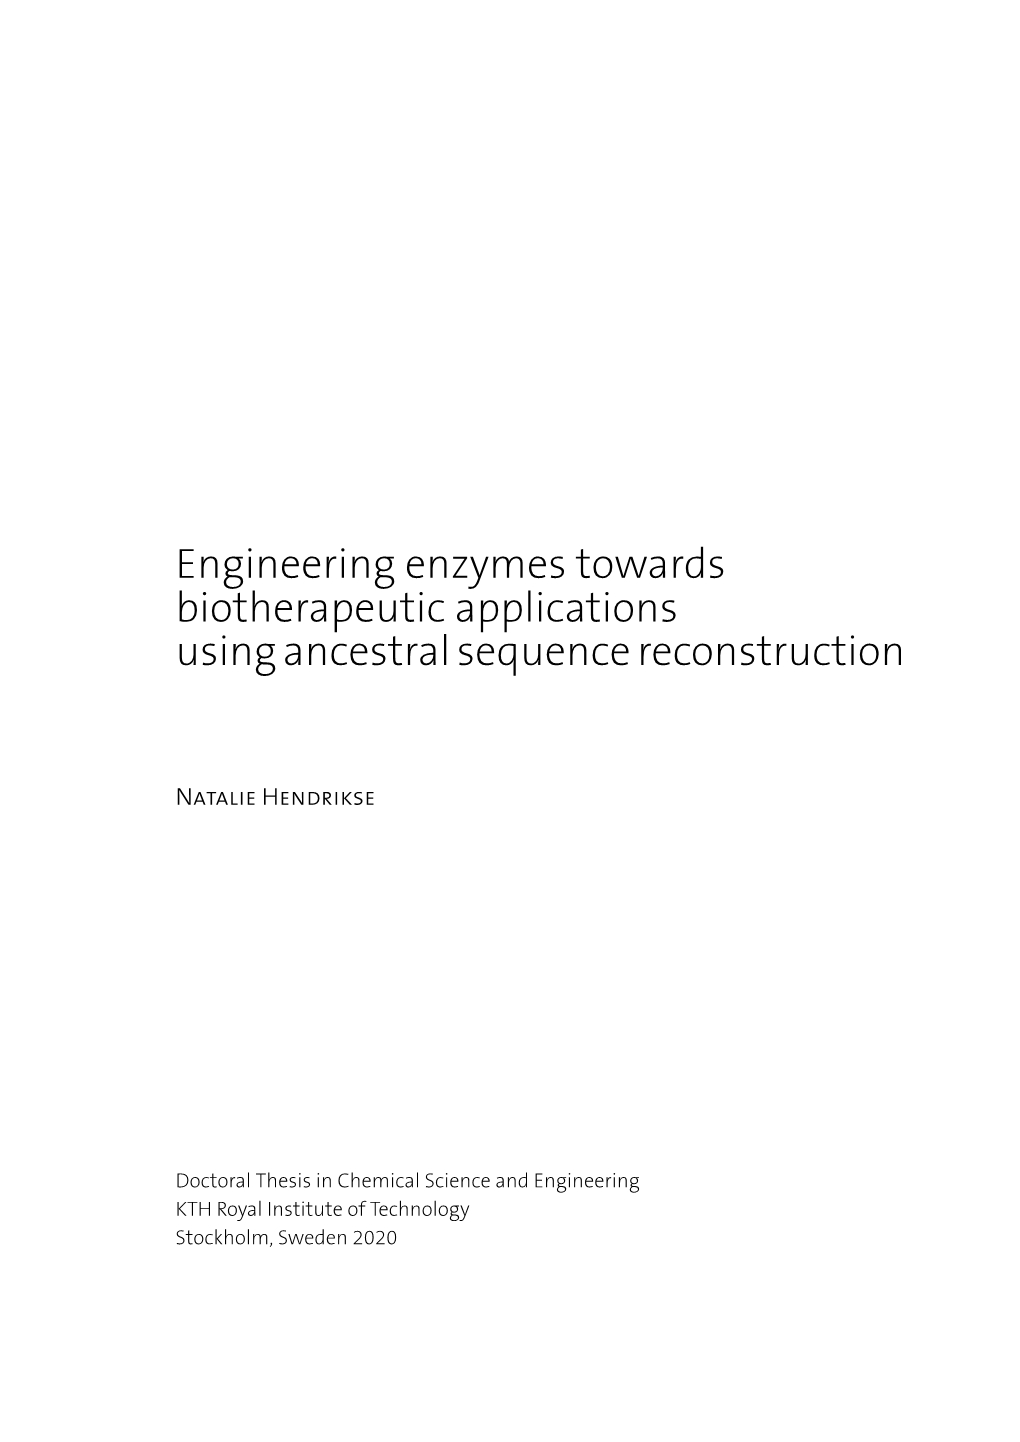 Engineering Enzymes Towards Biotherapeutic Applications Using Ancestral Sequence Reconstruction